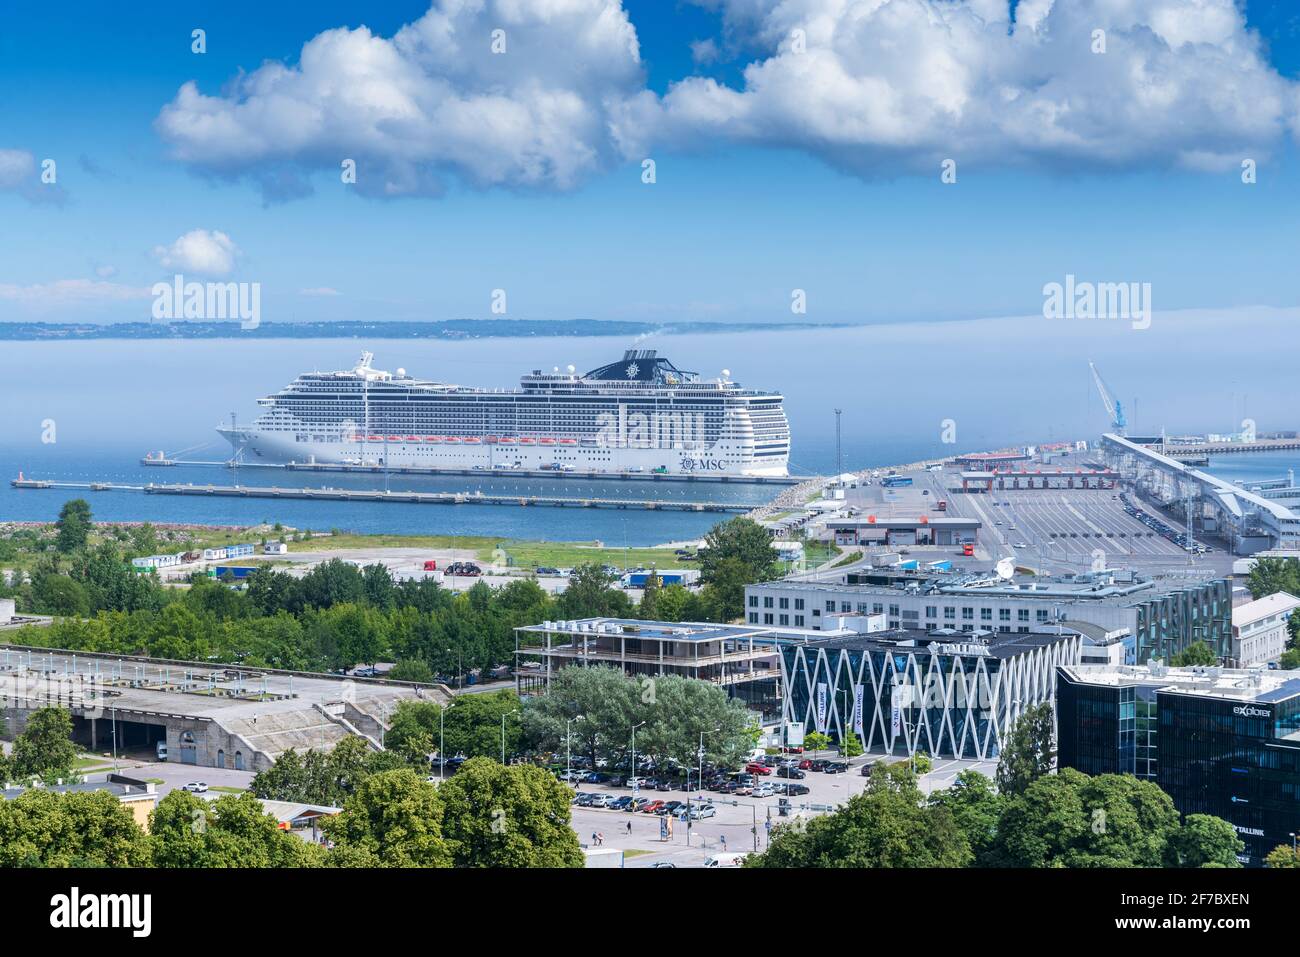 Port of Tallinn, capital of Estonia, is filled with many ships Stock Photo